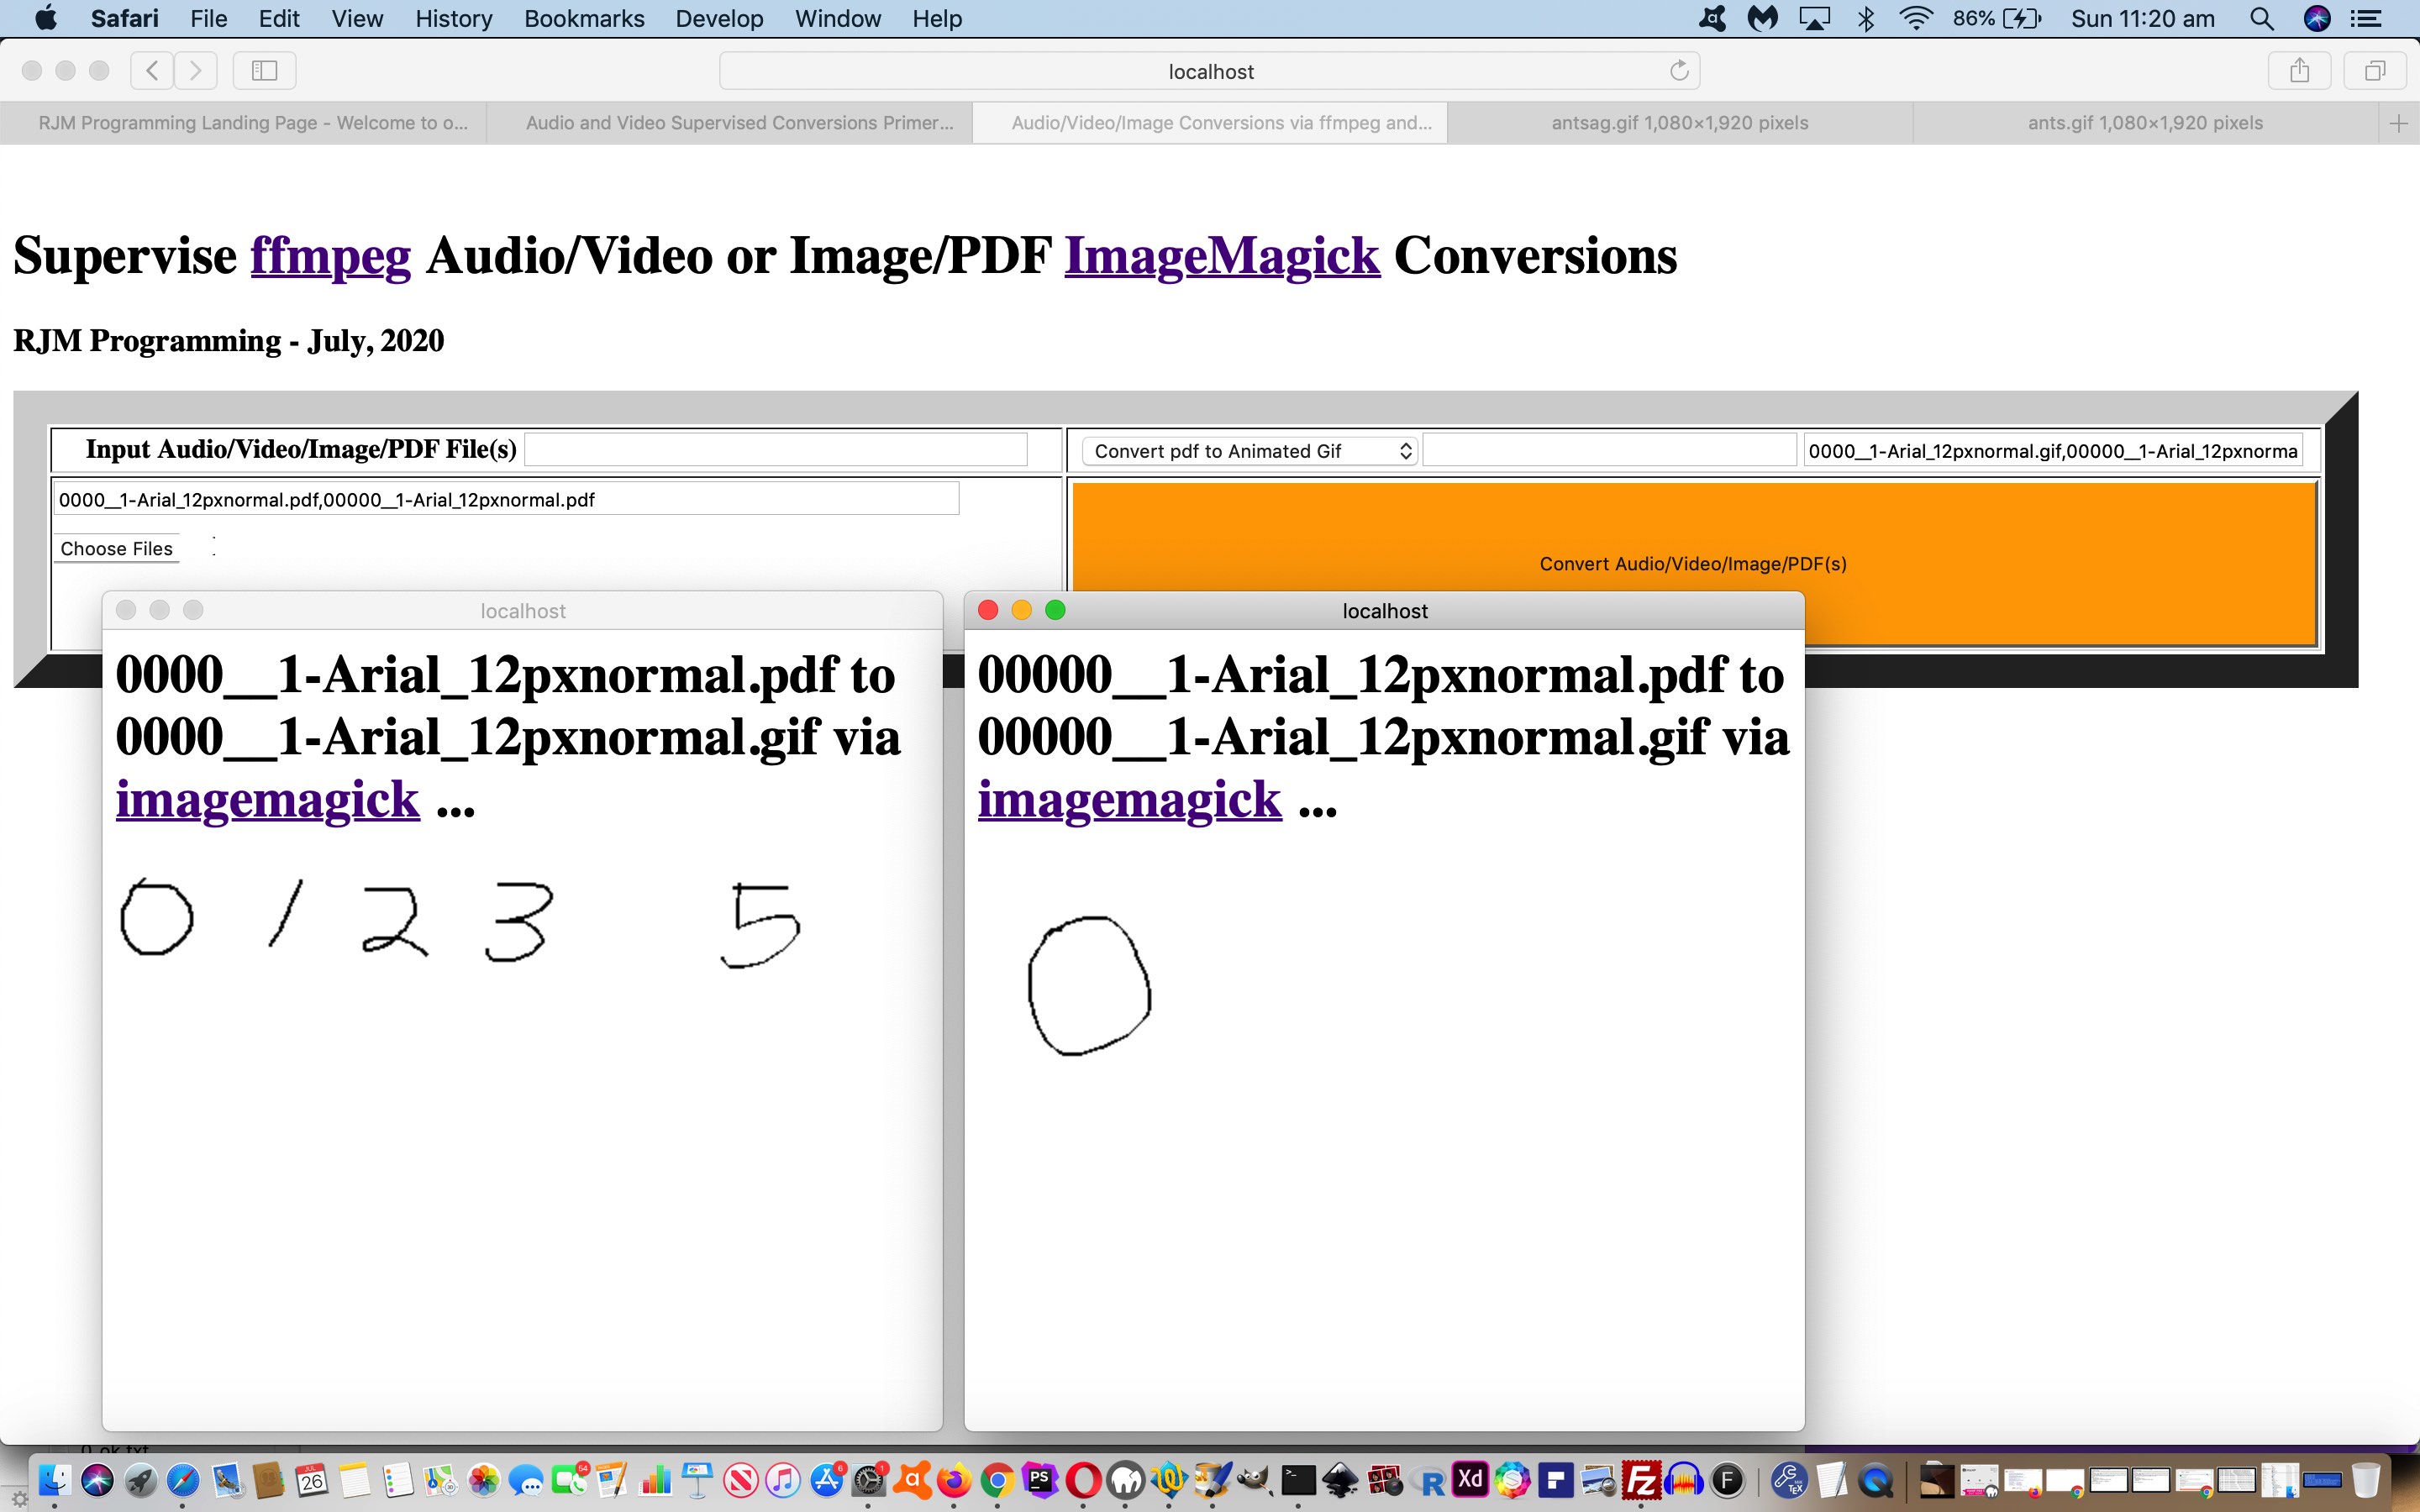 Image/PDF and Audio/Video Supervised Conversions Tutorial